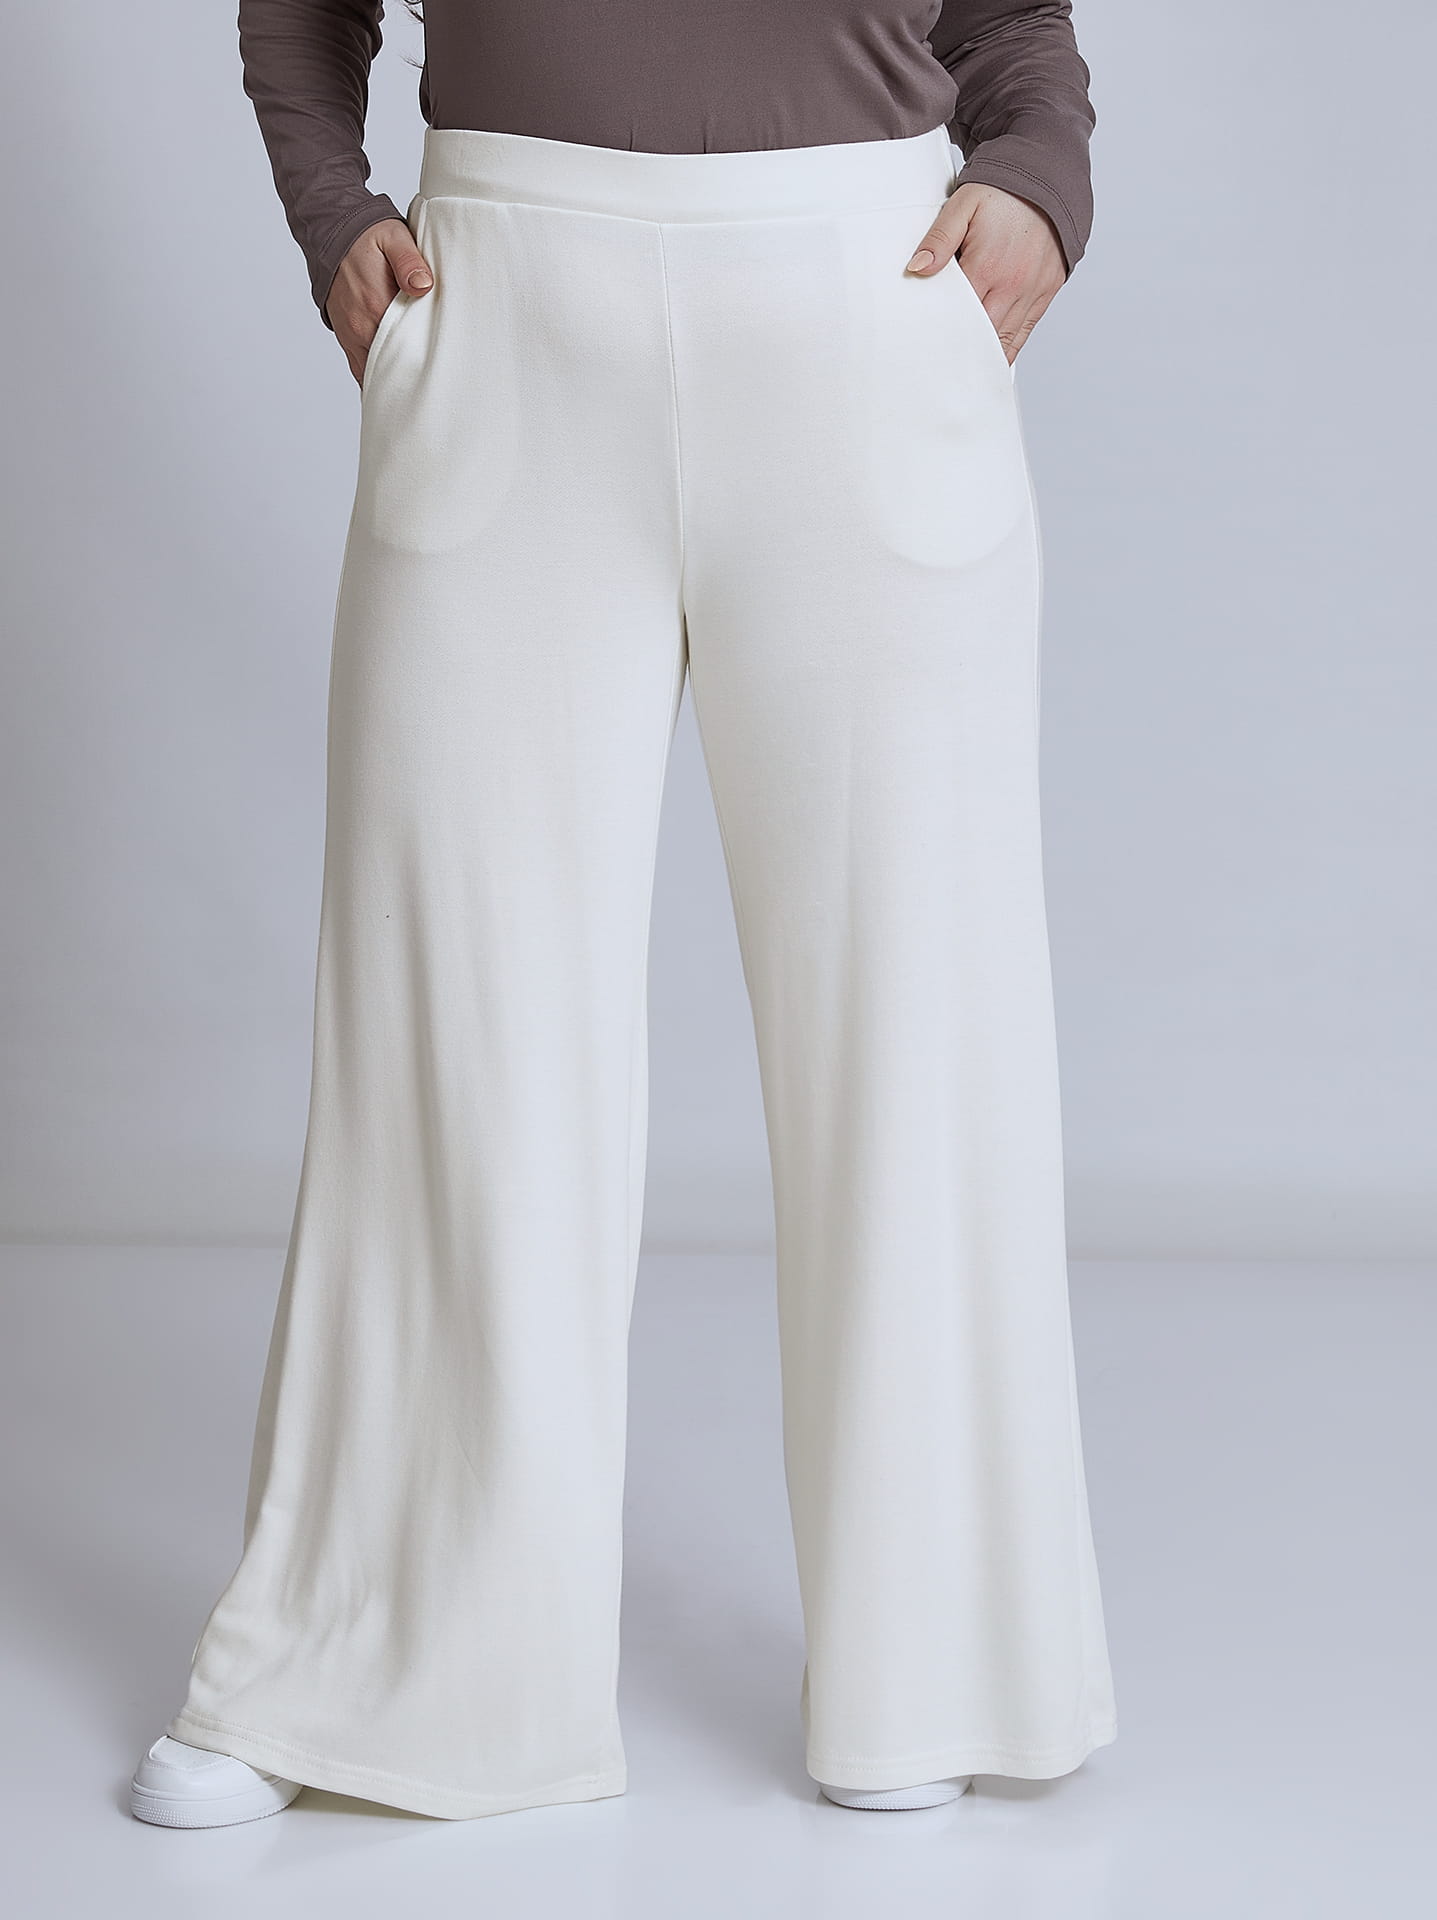 High waist wide leg trousers curvy in off white, 24.99€